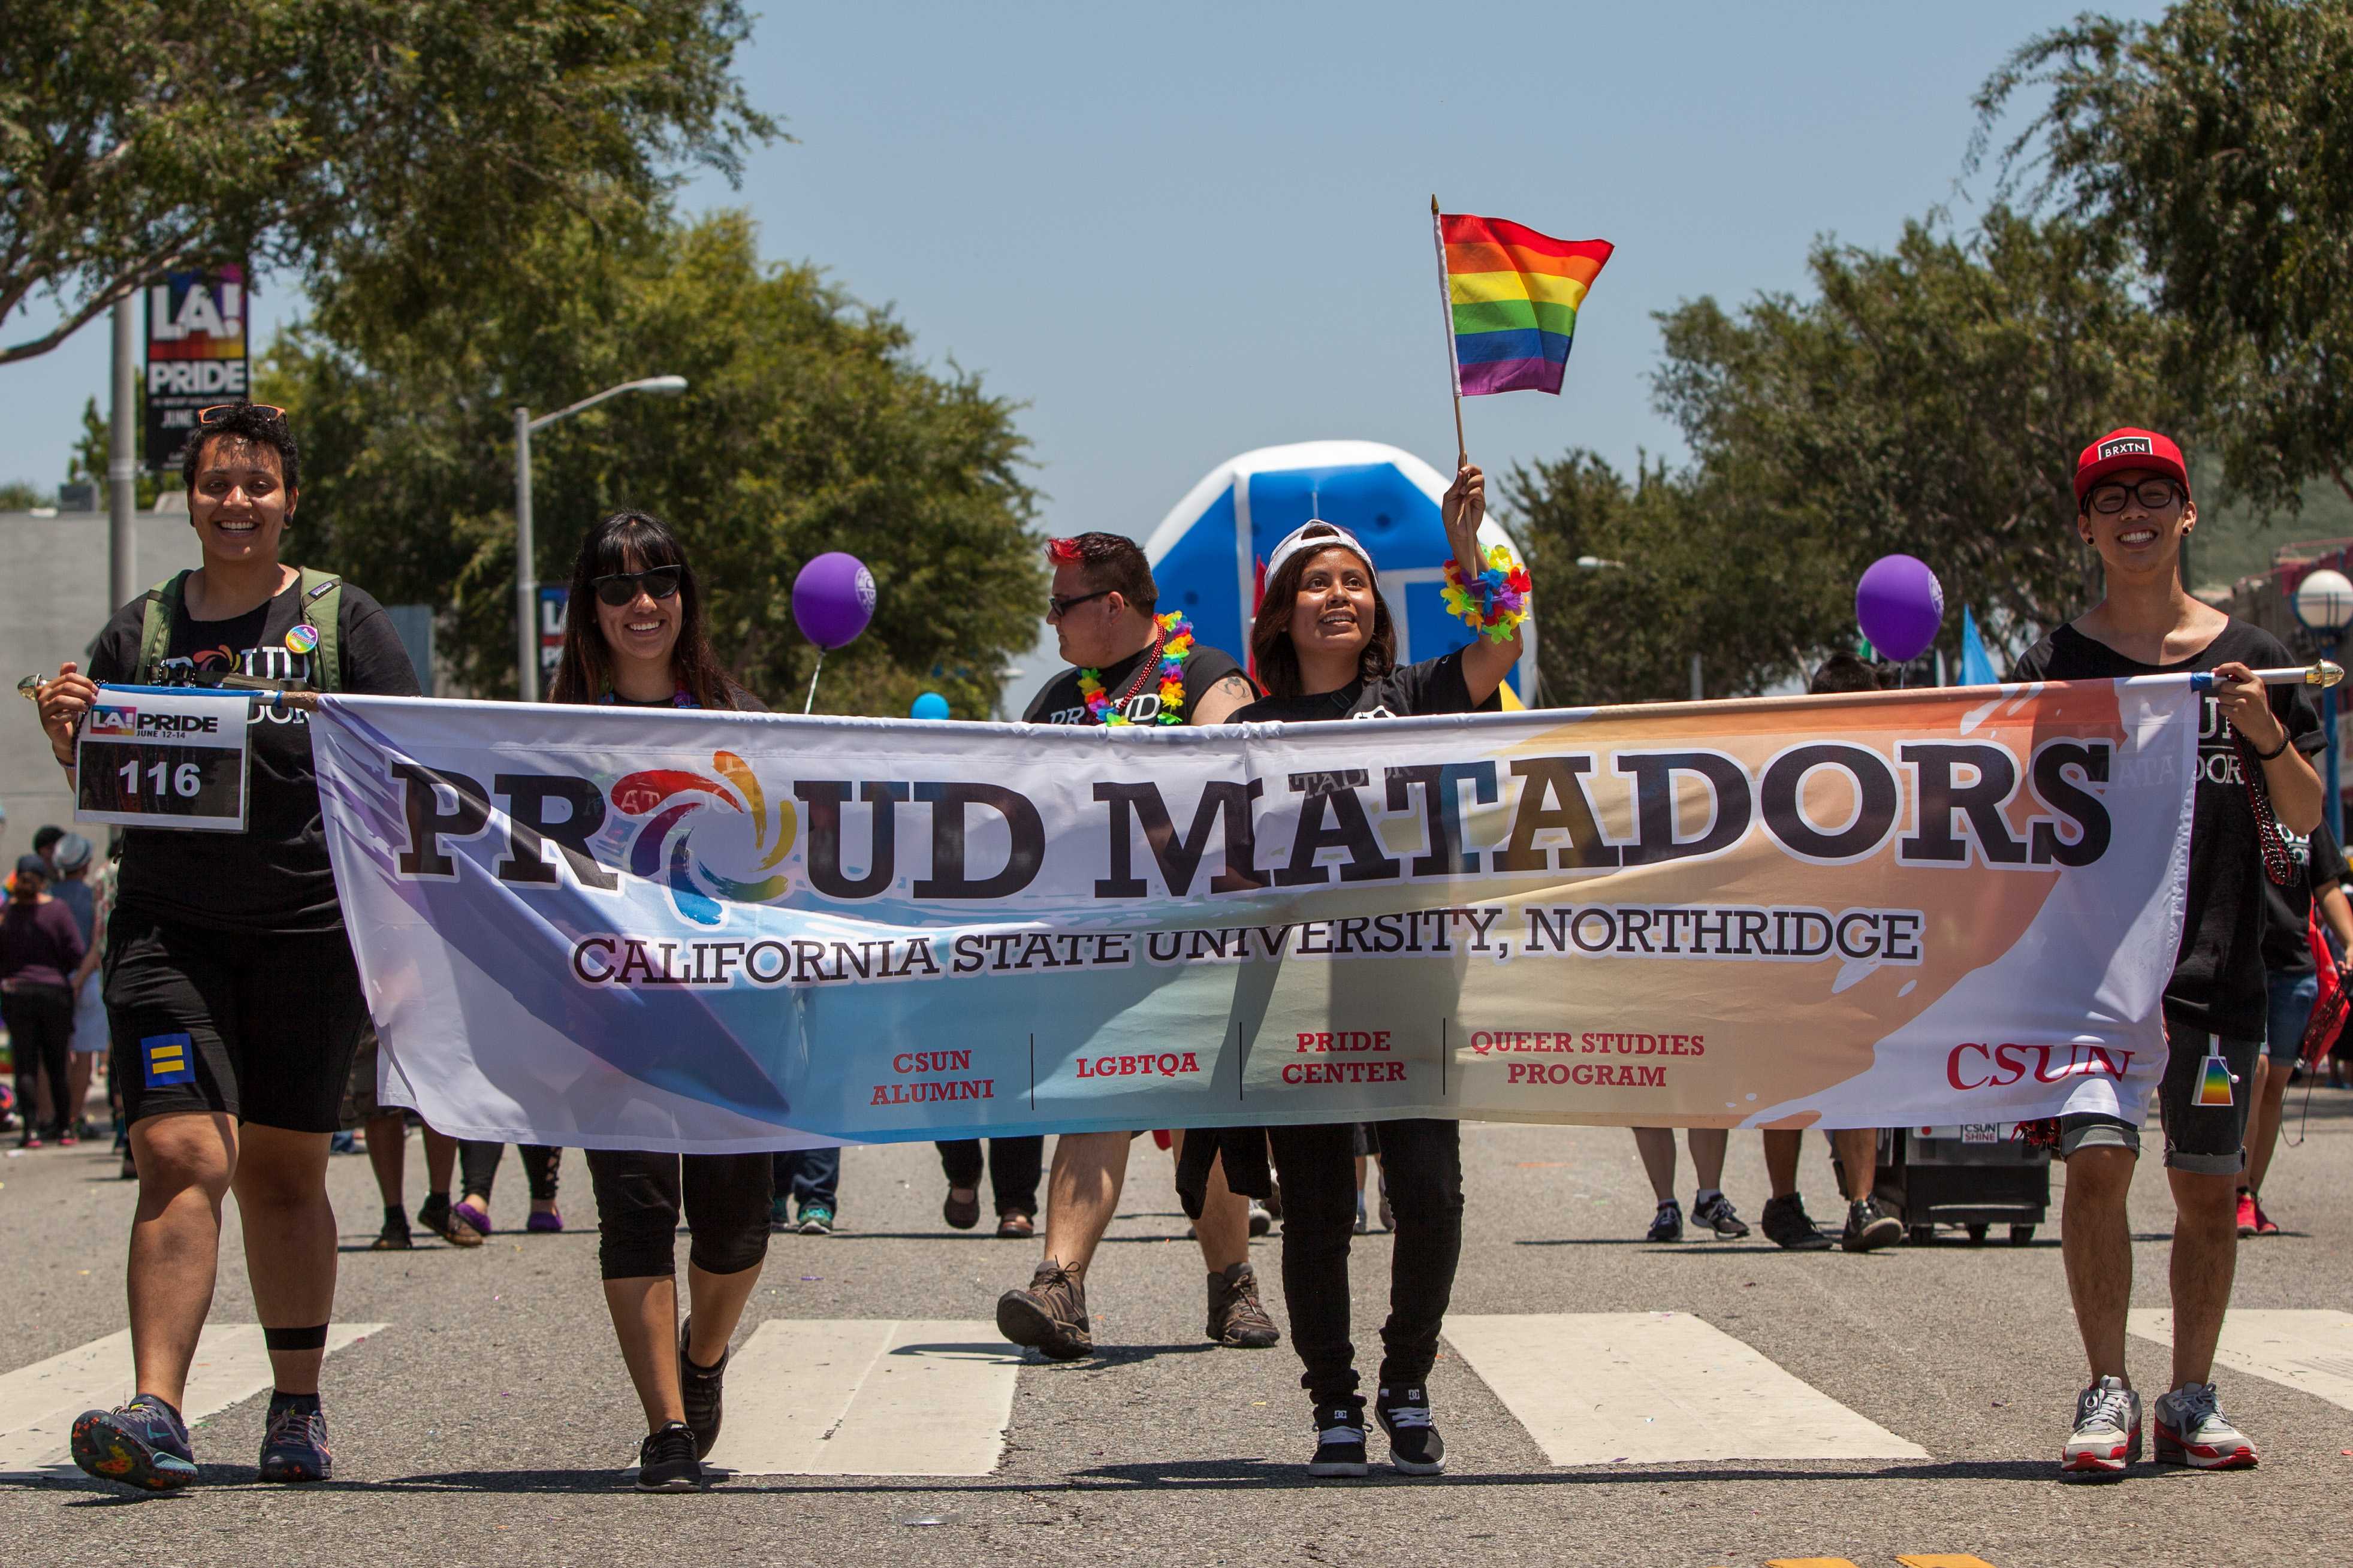 From left, Michelle Jones, Rosa Rodriguez, Little Jack and Jarred Gonzaga carry the Pride Center banner along the parade route. 

The Los Angeles PRIDE Parade was held on June 14, 2015 traveling Santa Monica Blvd. in West Hollywood, Calif. Photo credit: Matt Rose